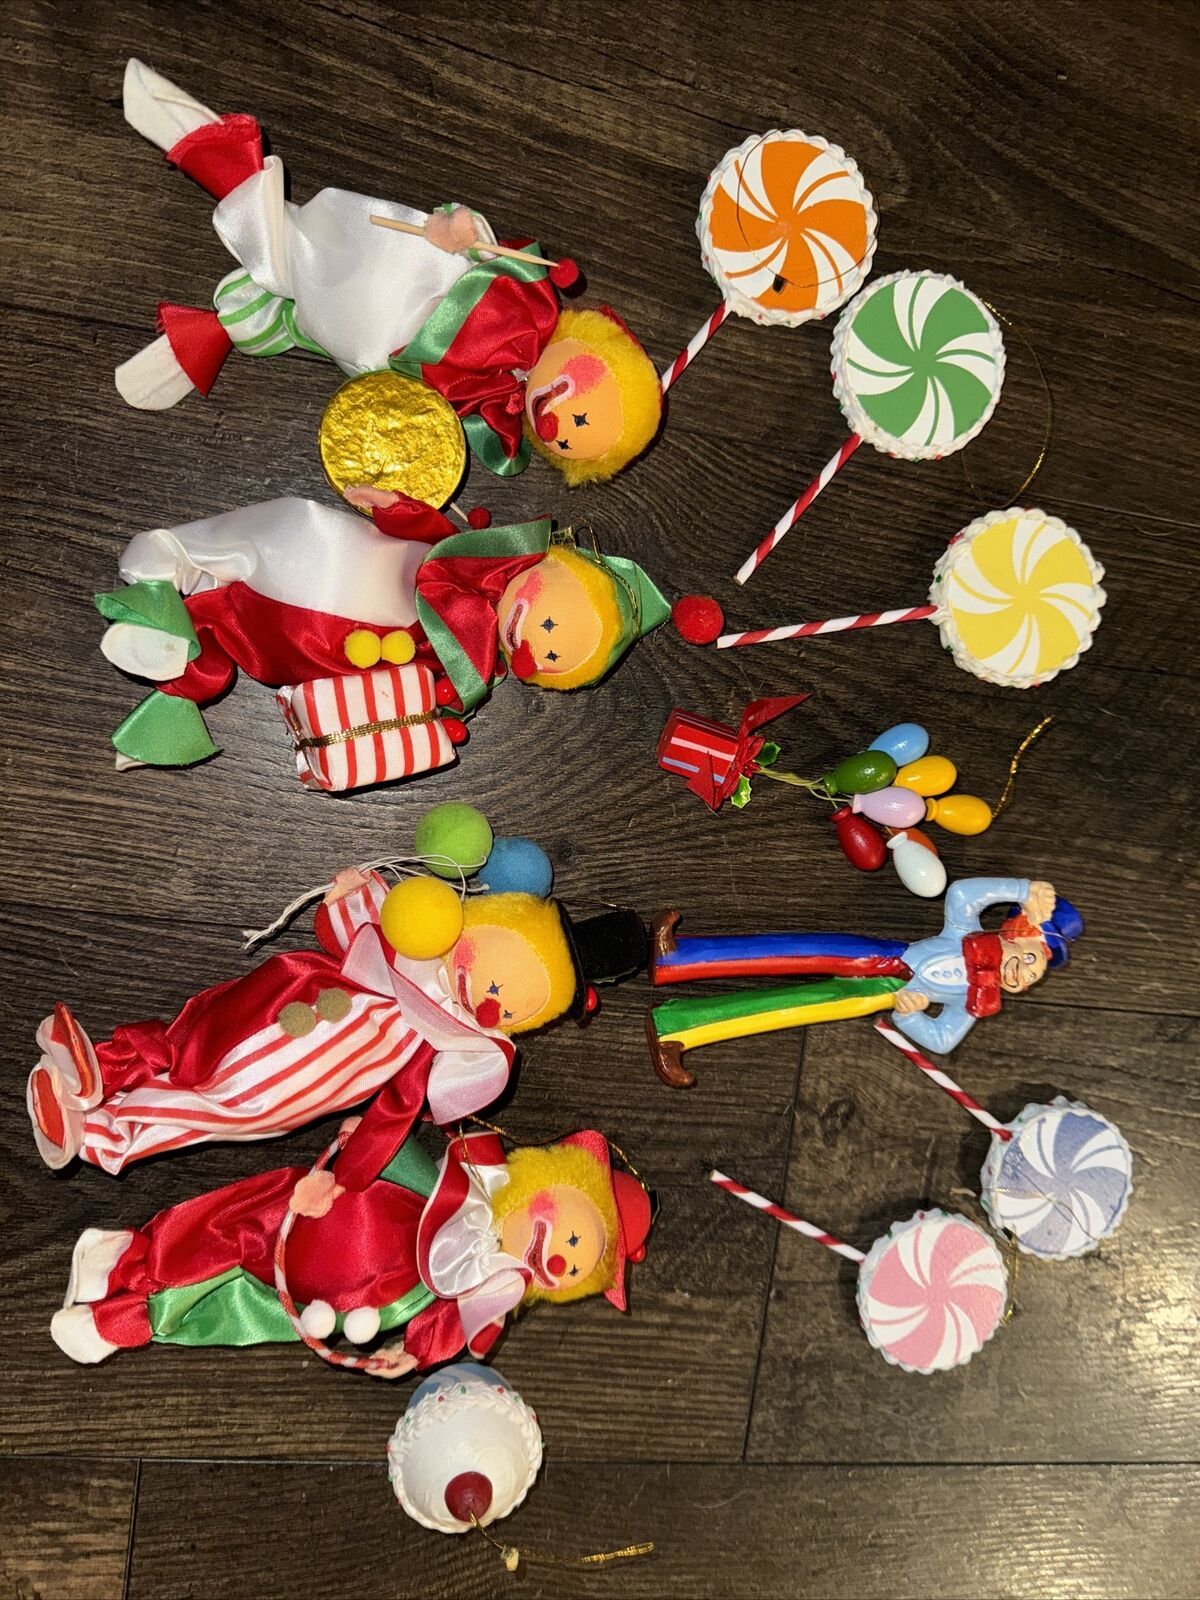 Vintage 1980s Russ Clown Circus Ornaments Made In Taiwan Mixed Lot